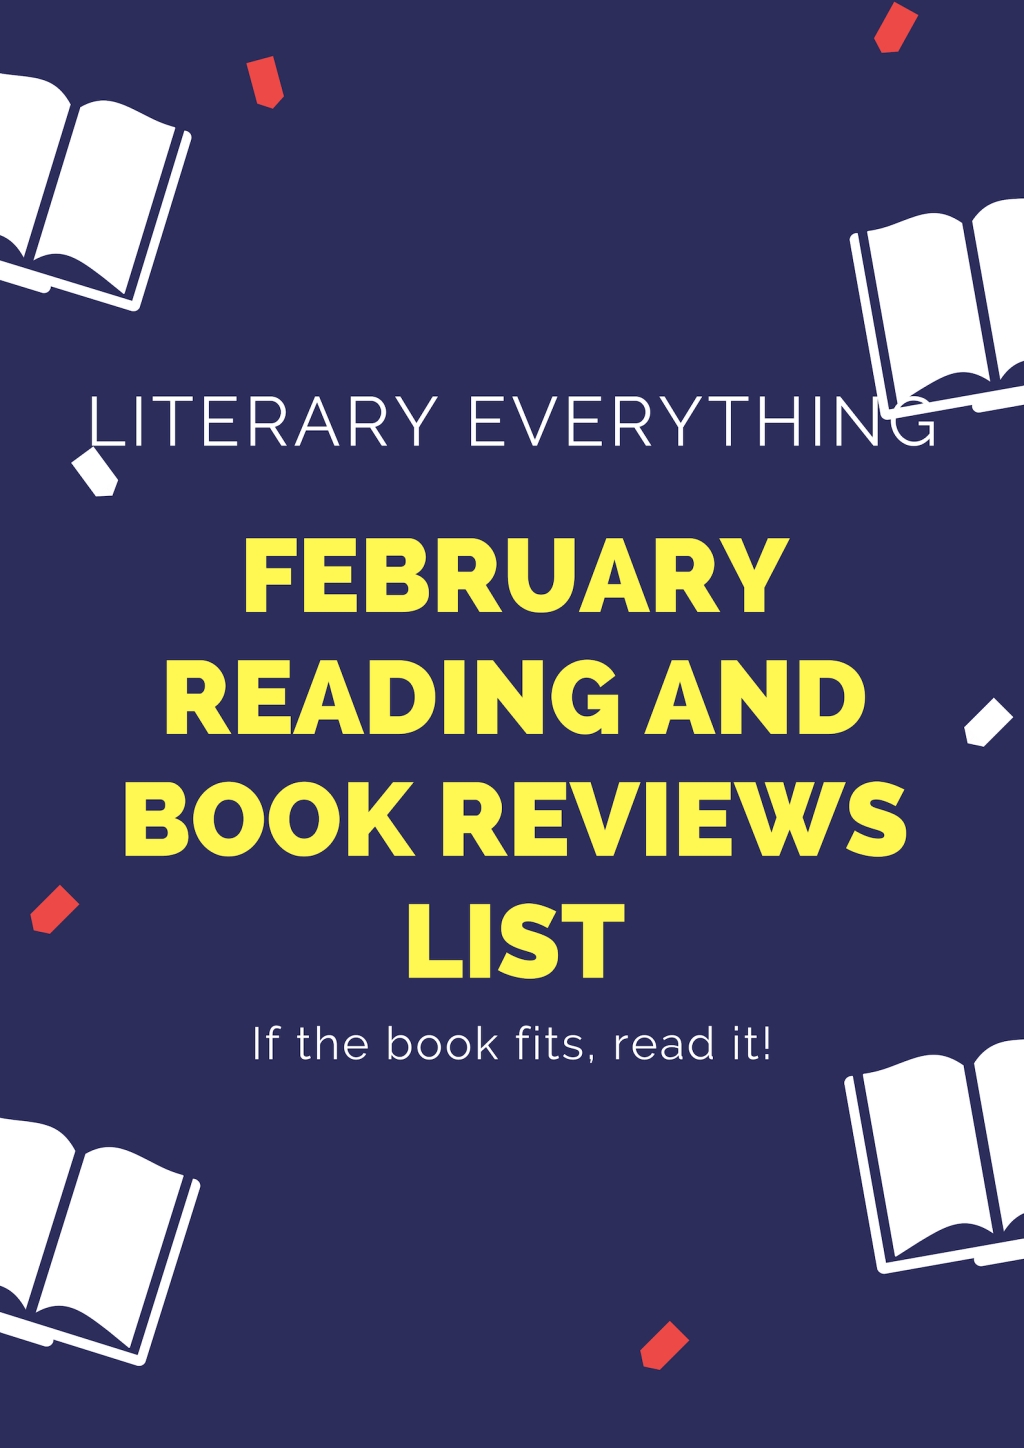 February 2019 Reading and Book Reviews List